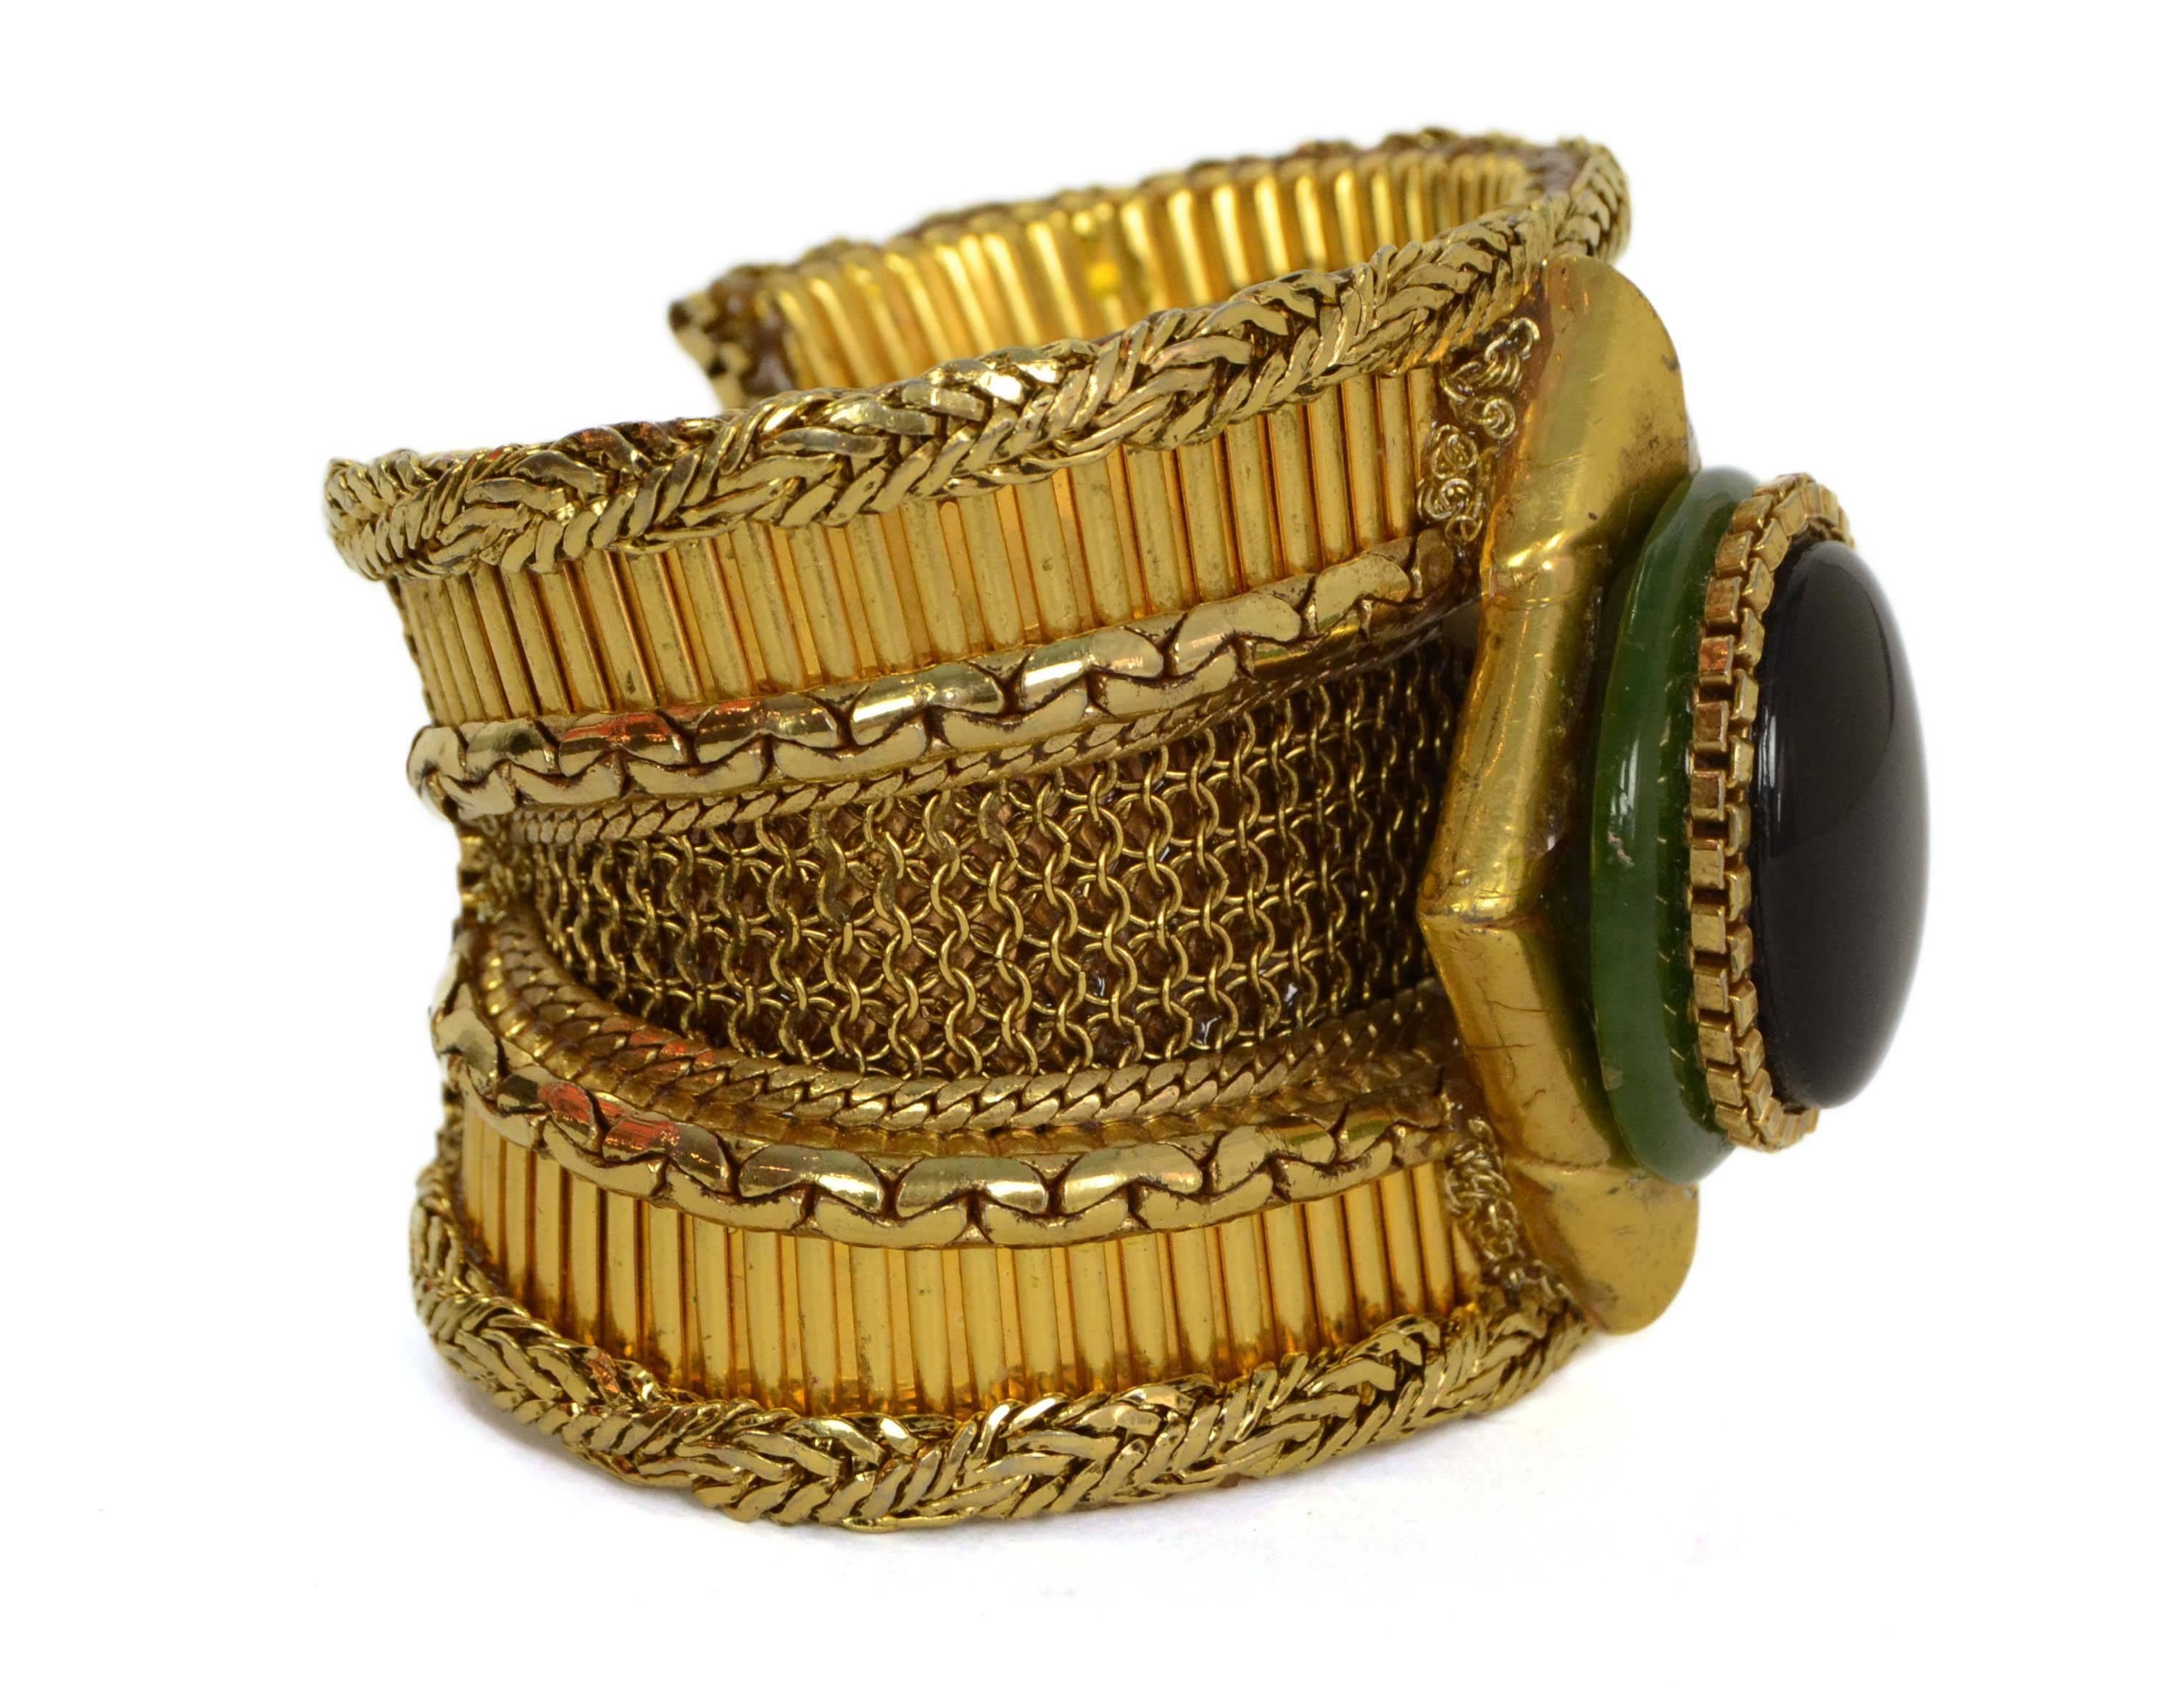 Wendy Gell Vintage '86 Textured Wide Gold Cuff 
Features black and green stones in center
Year of Production: 1986
Color: Goldtone, green and black
Materials: Metal and stone
Closure: None
Stamp: C Wendy Gell 1986
Overall Condition: Excellent